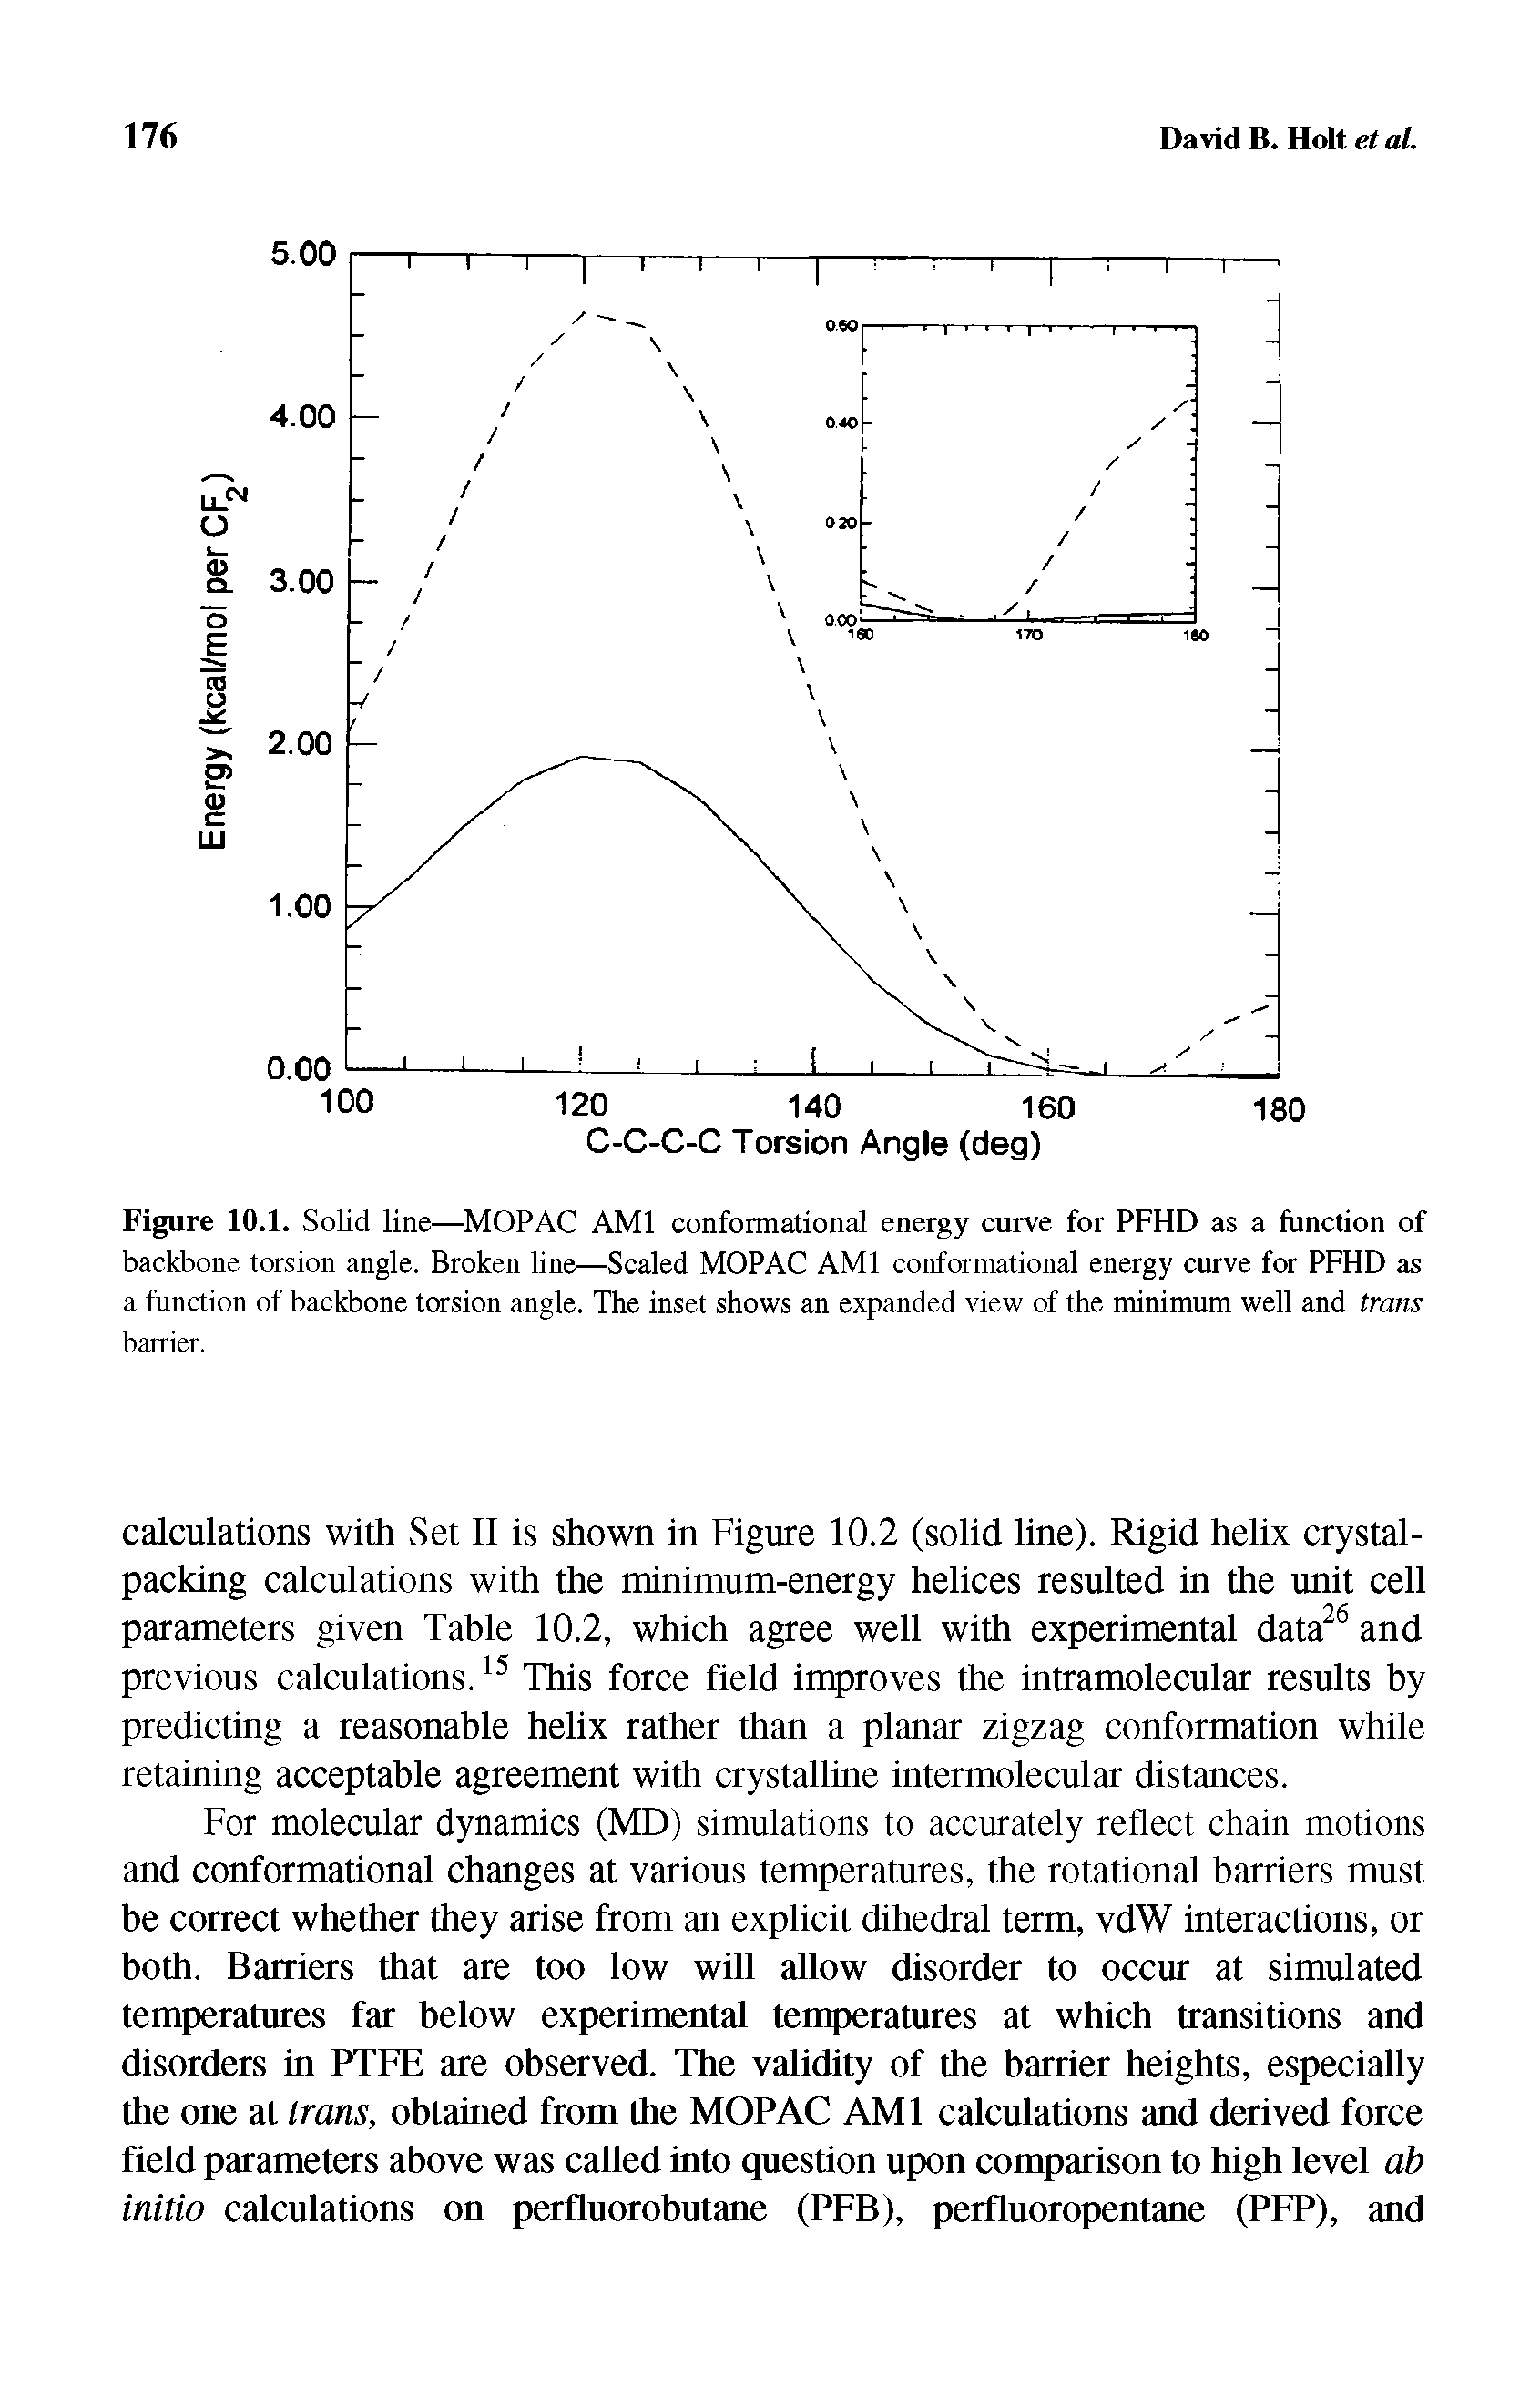 Figure 10.1. Solid line—MOP AC AMI conformational energy curve for PFHD as a function of backbone torsion angle. Broken line—Scaled MOPAC AMI conformational energy curve for PFHD as a function of backbone torsion angle. The inset shows an expanded view of the minimum well and trans barrier.